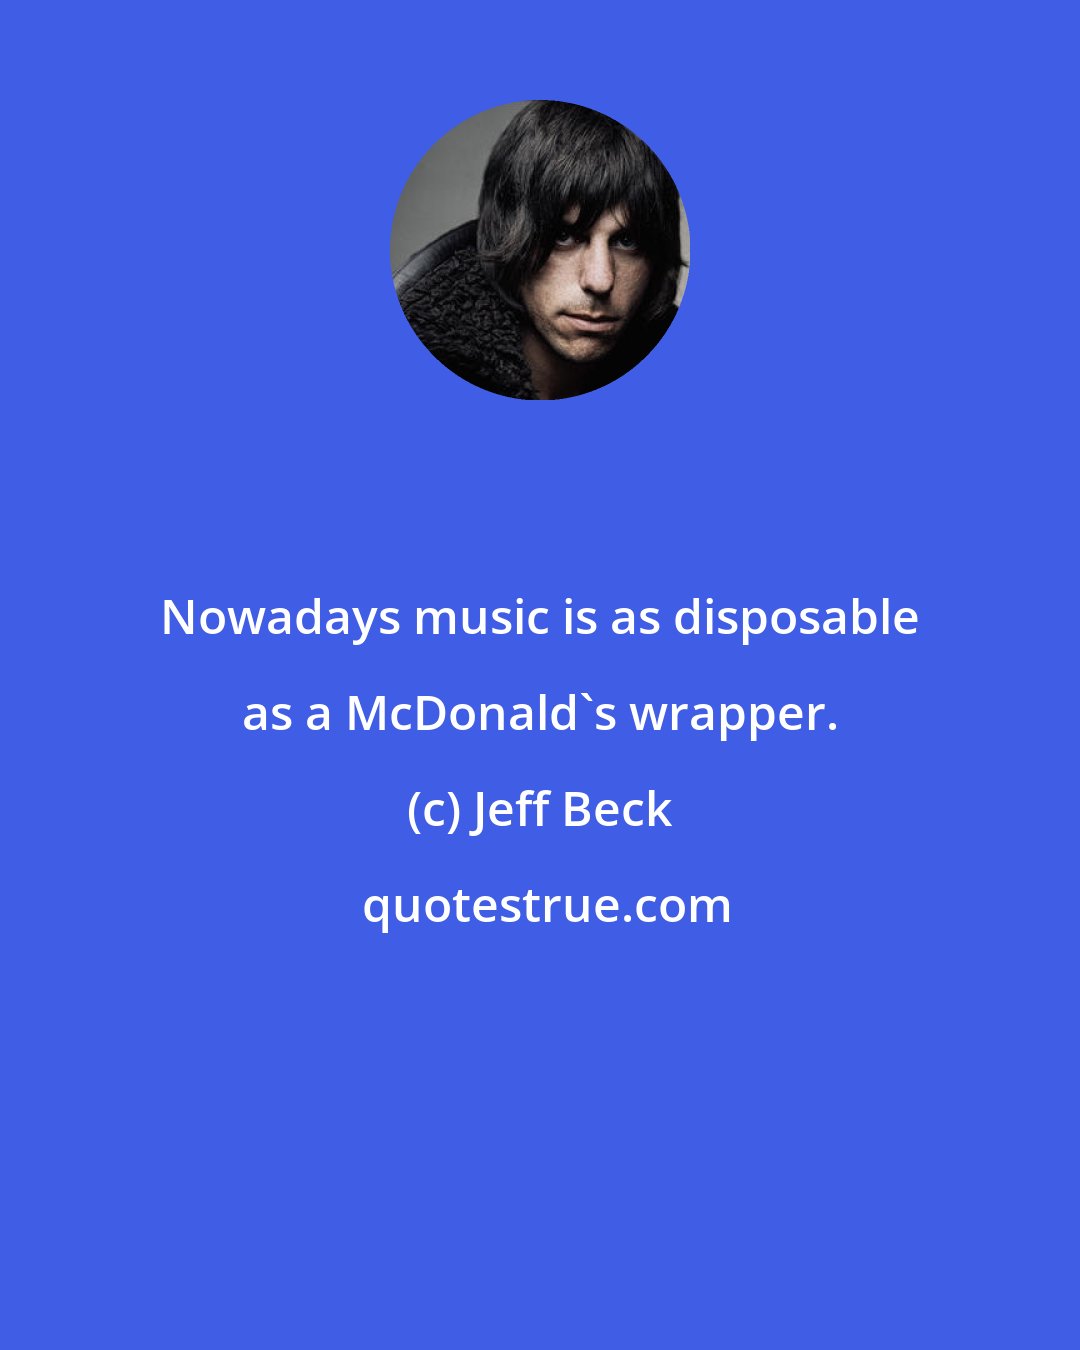 Jeff Beck: Nowadays music is as disposable as a McDonald's wrapper.